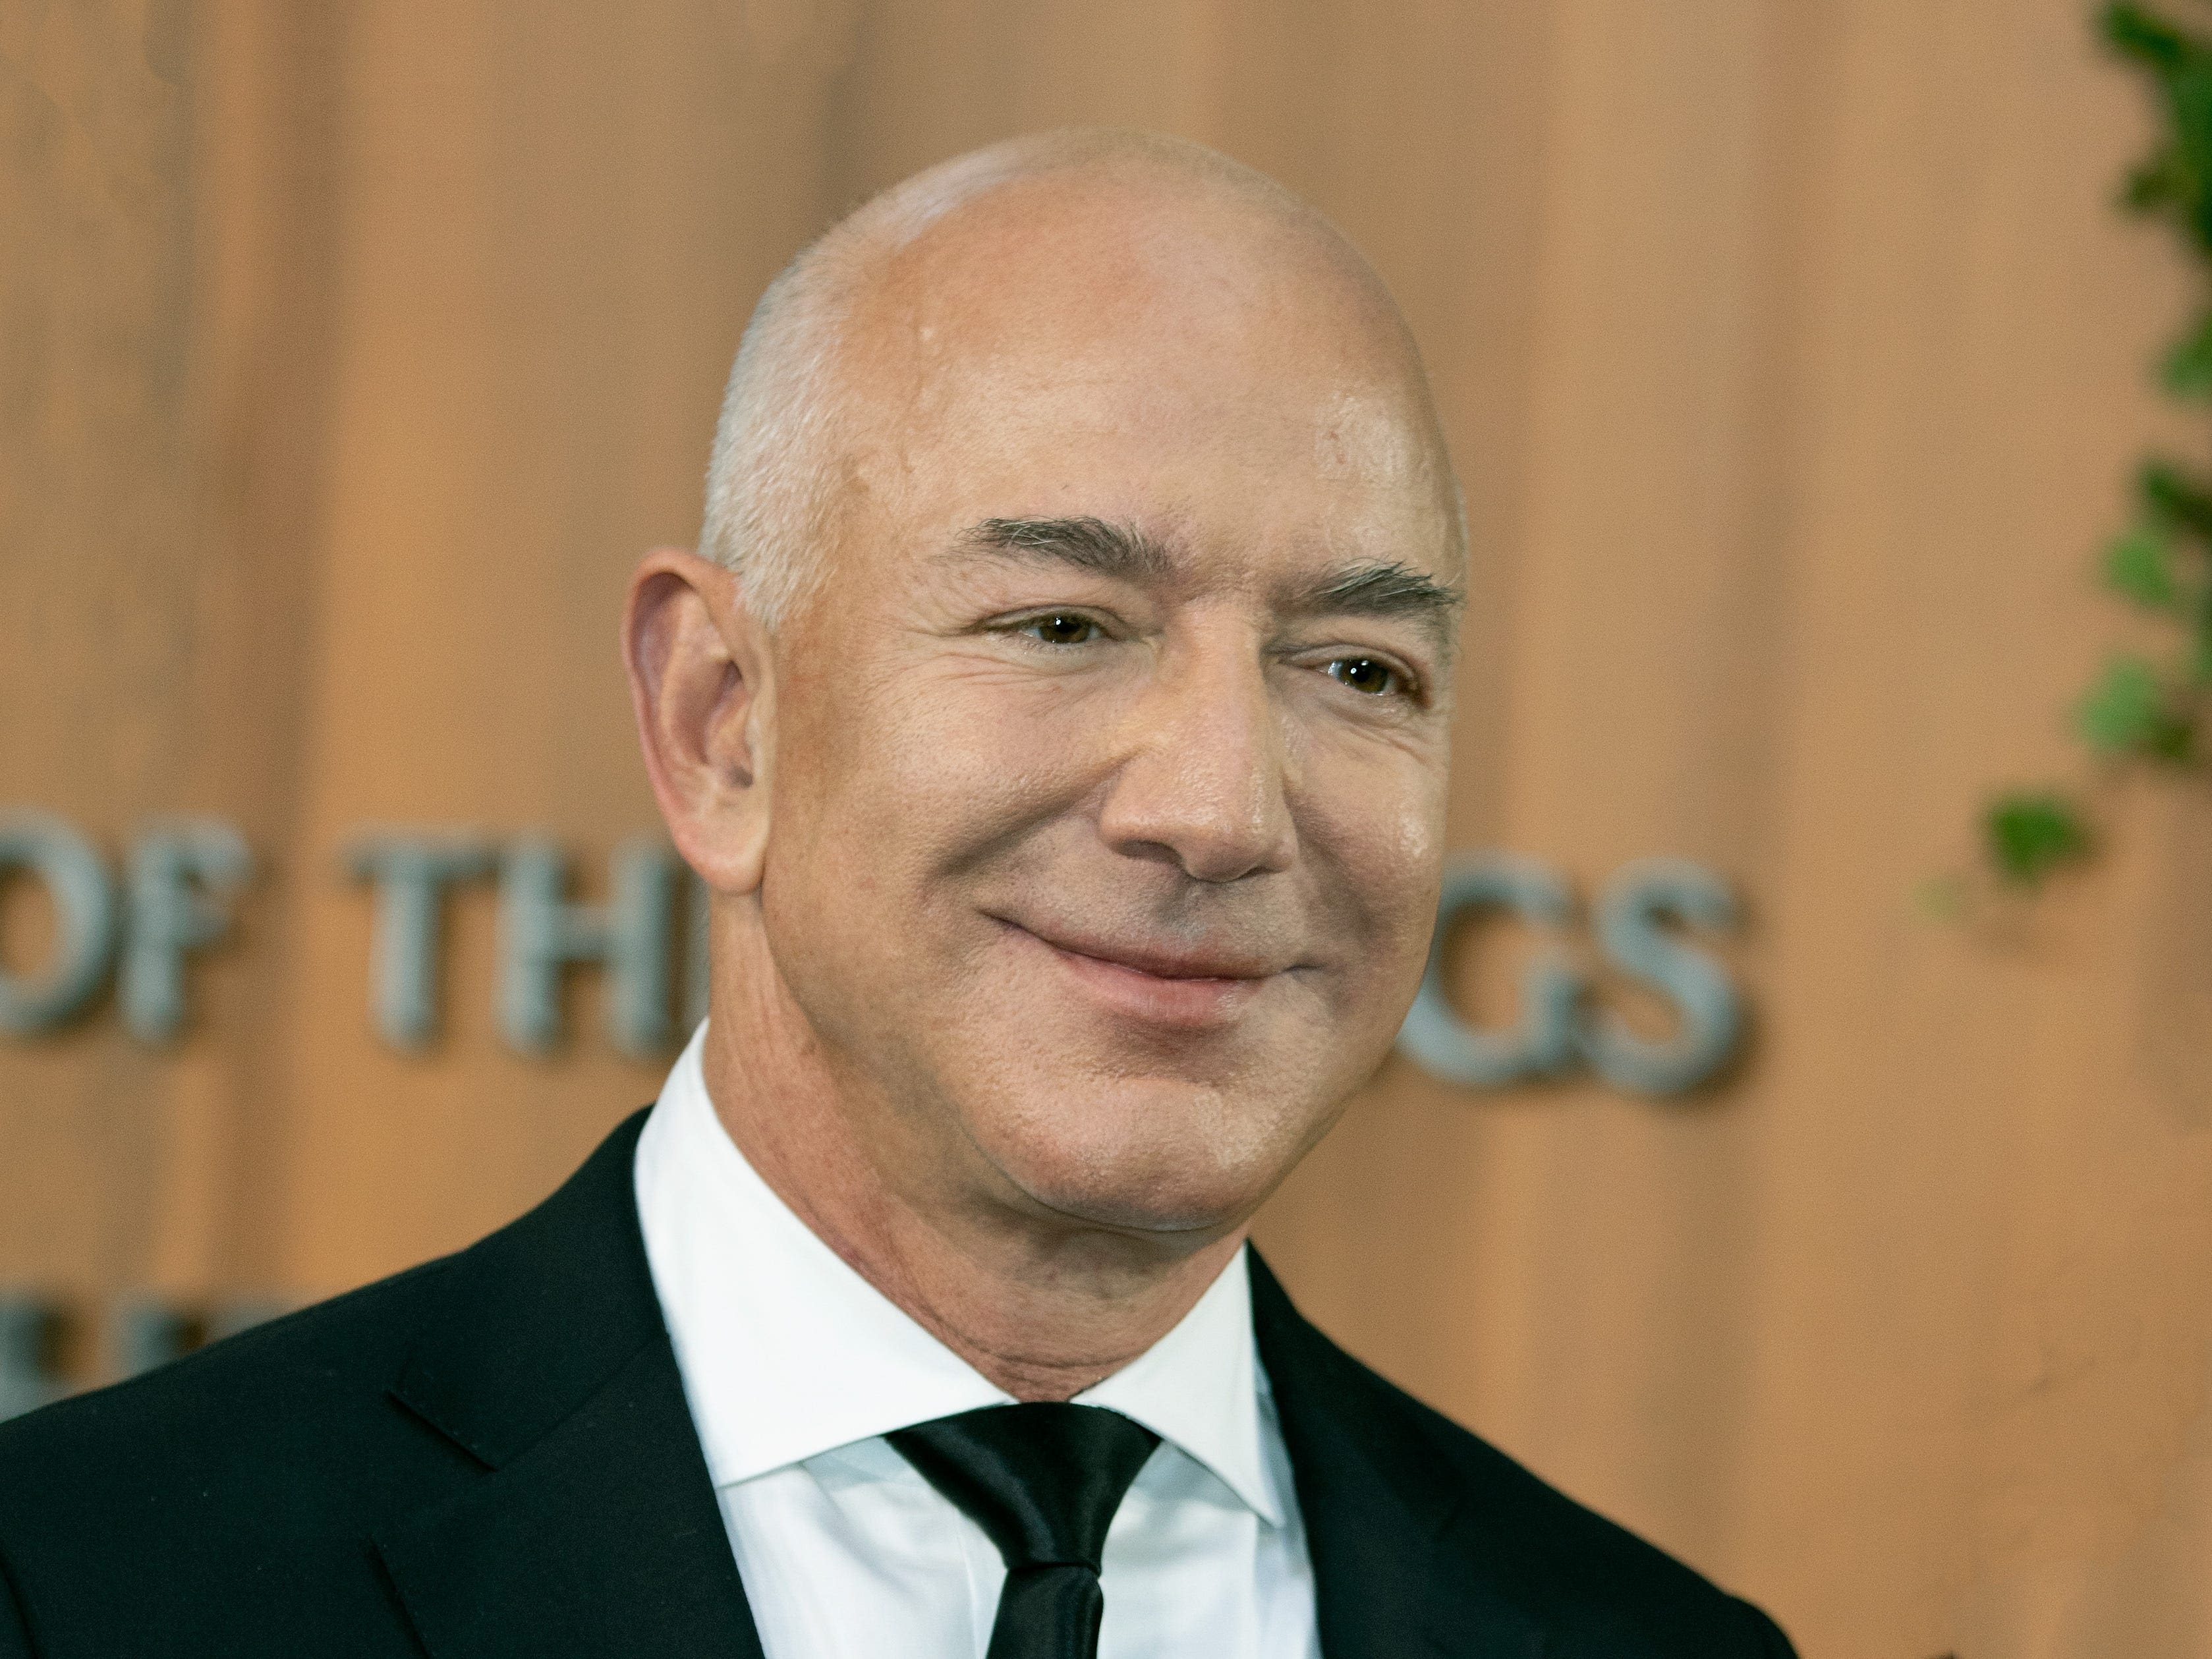 Jeff Bezos dumped over a million Amazon shares to fund his preschool nonprofit, filings show